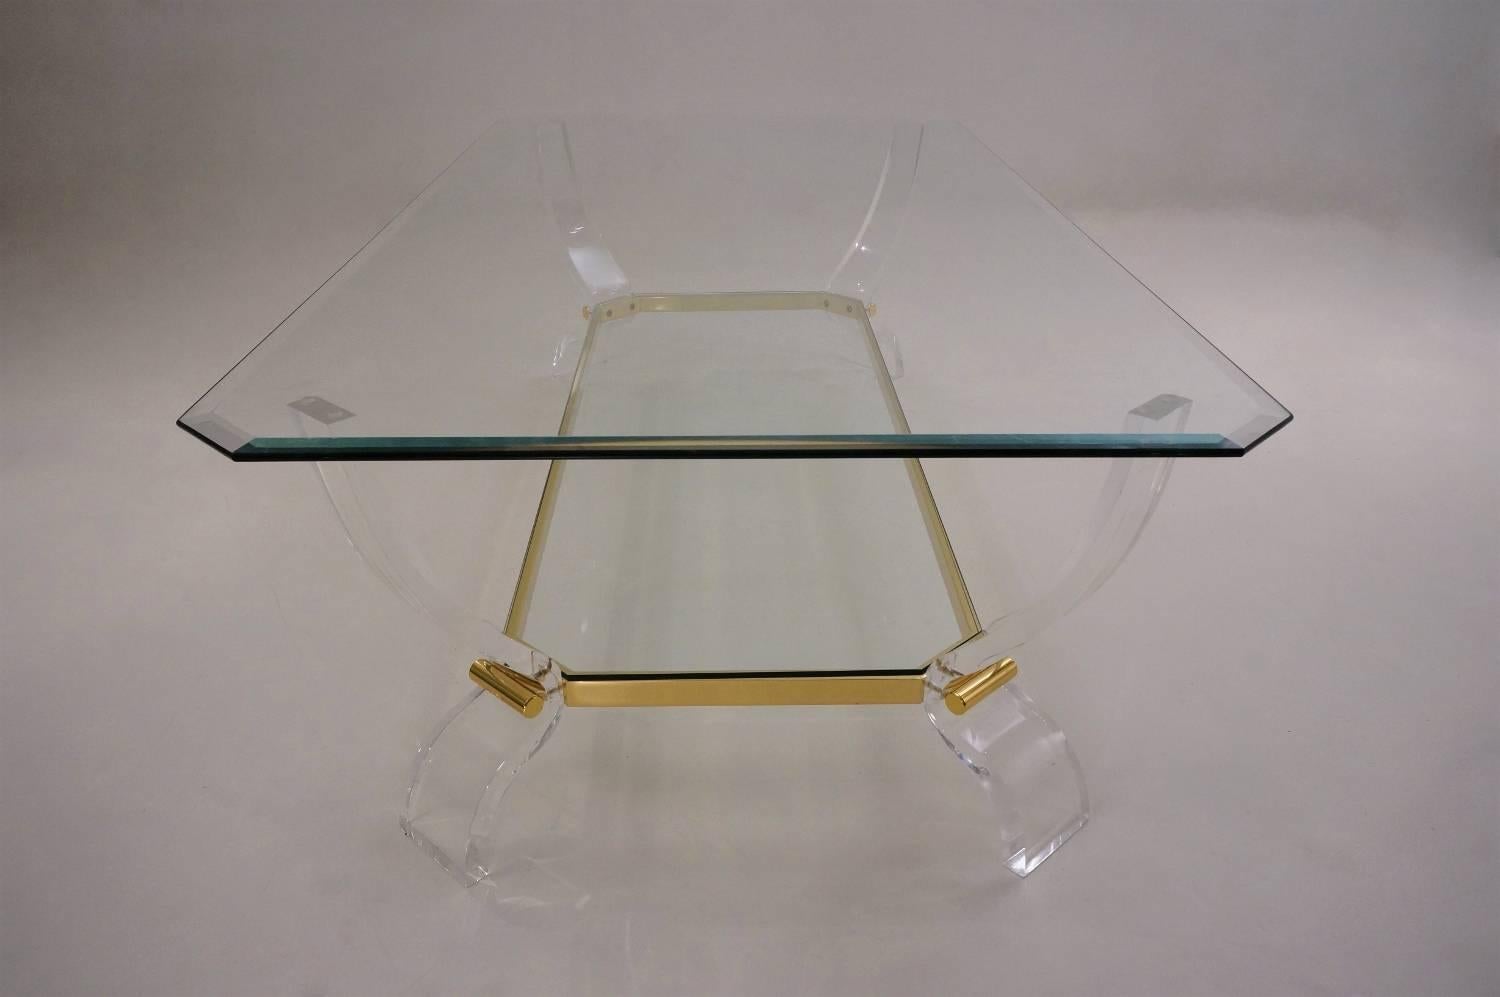 Late 20th Century Charles Hollis Jones Table, Lucite with Gilt Detail, circa 1980s, American